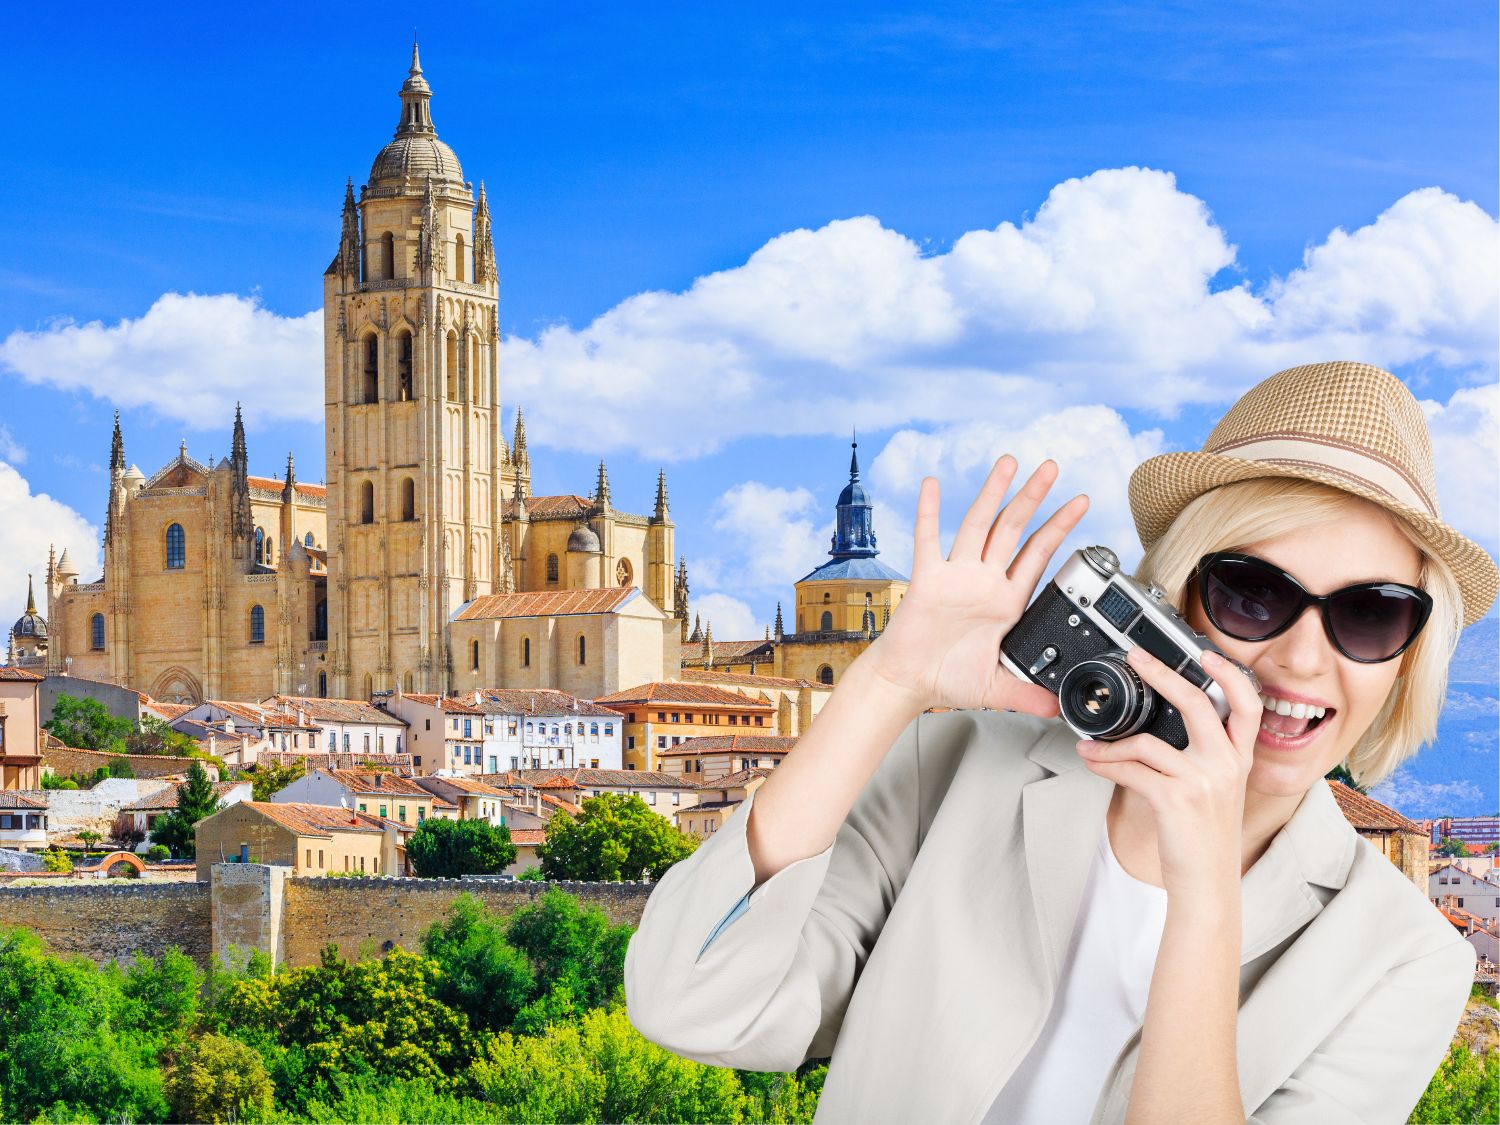 The 5 Best Spain Tours For Unforgettable Adventures That Are Achievable & Affordable